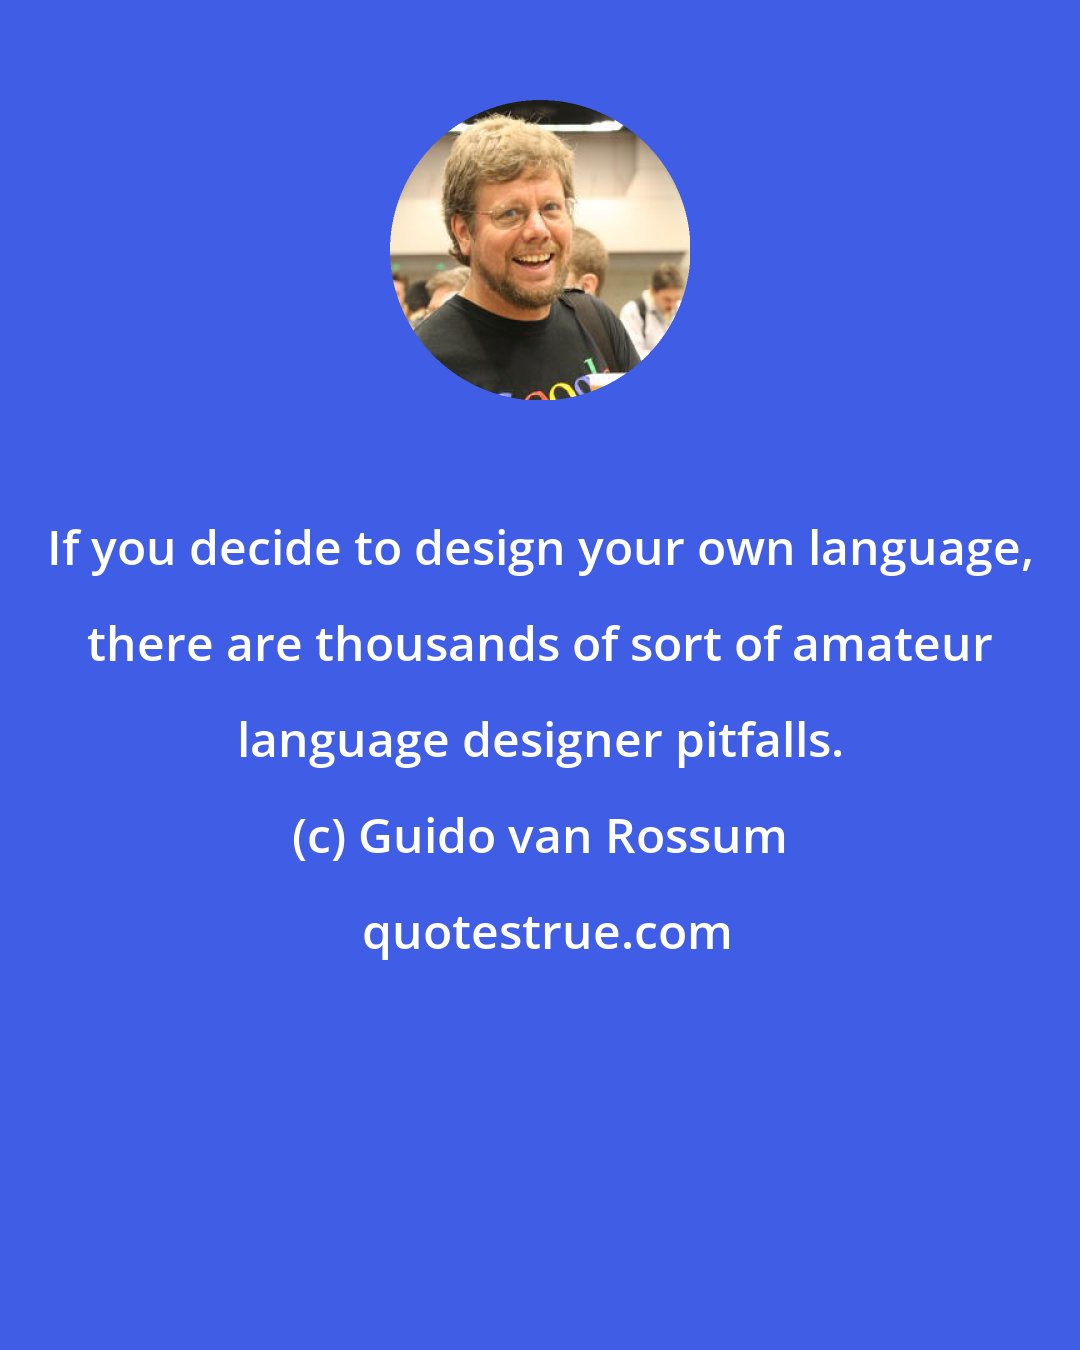 Guido van Rossum: If you decide to design your own language, there are thousands of sort of amateur language designer pitfalls.